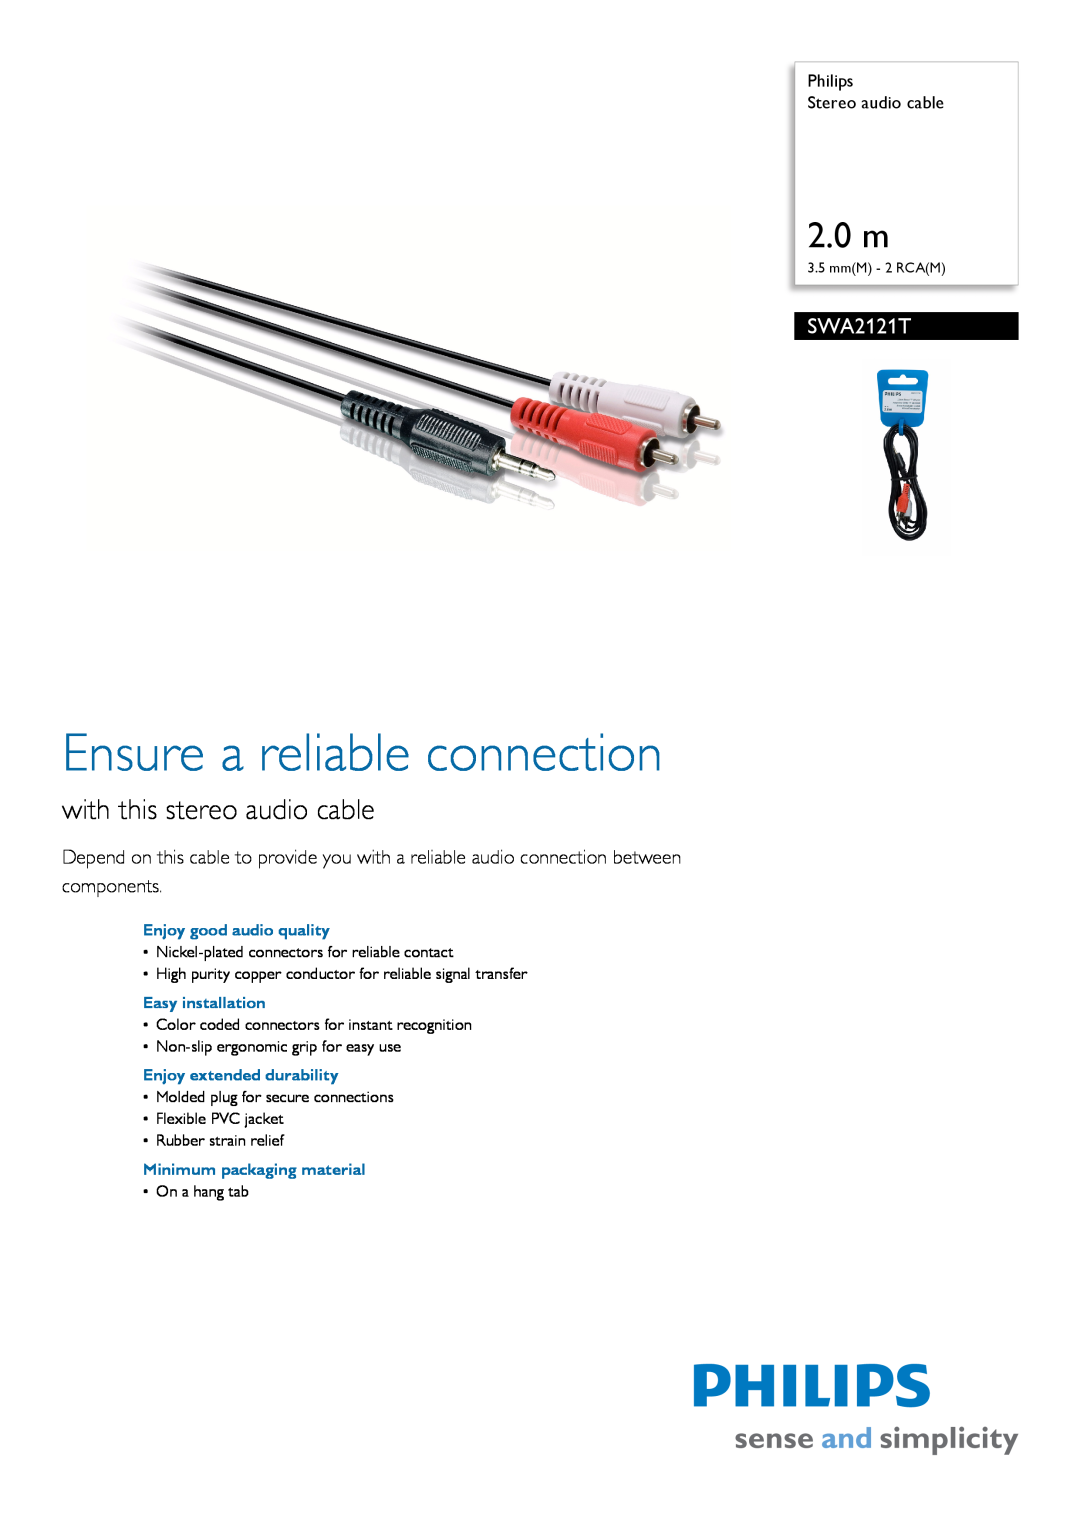 Philips SWA2121T manual Philips Stereo audio cable, Ensure a reliable connection, 2.0 m, with this stereo audio cable 